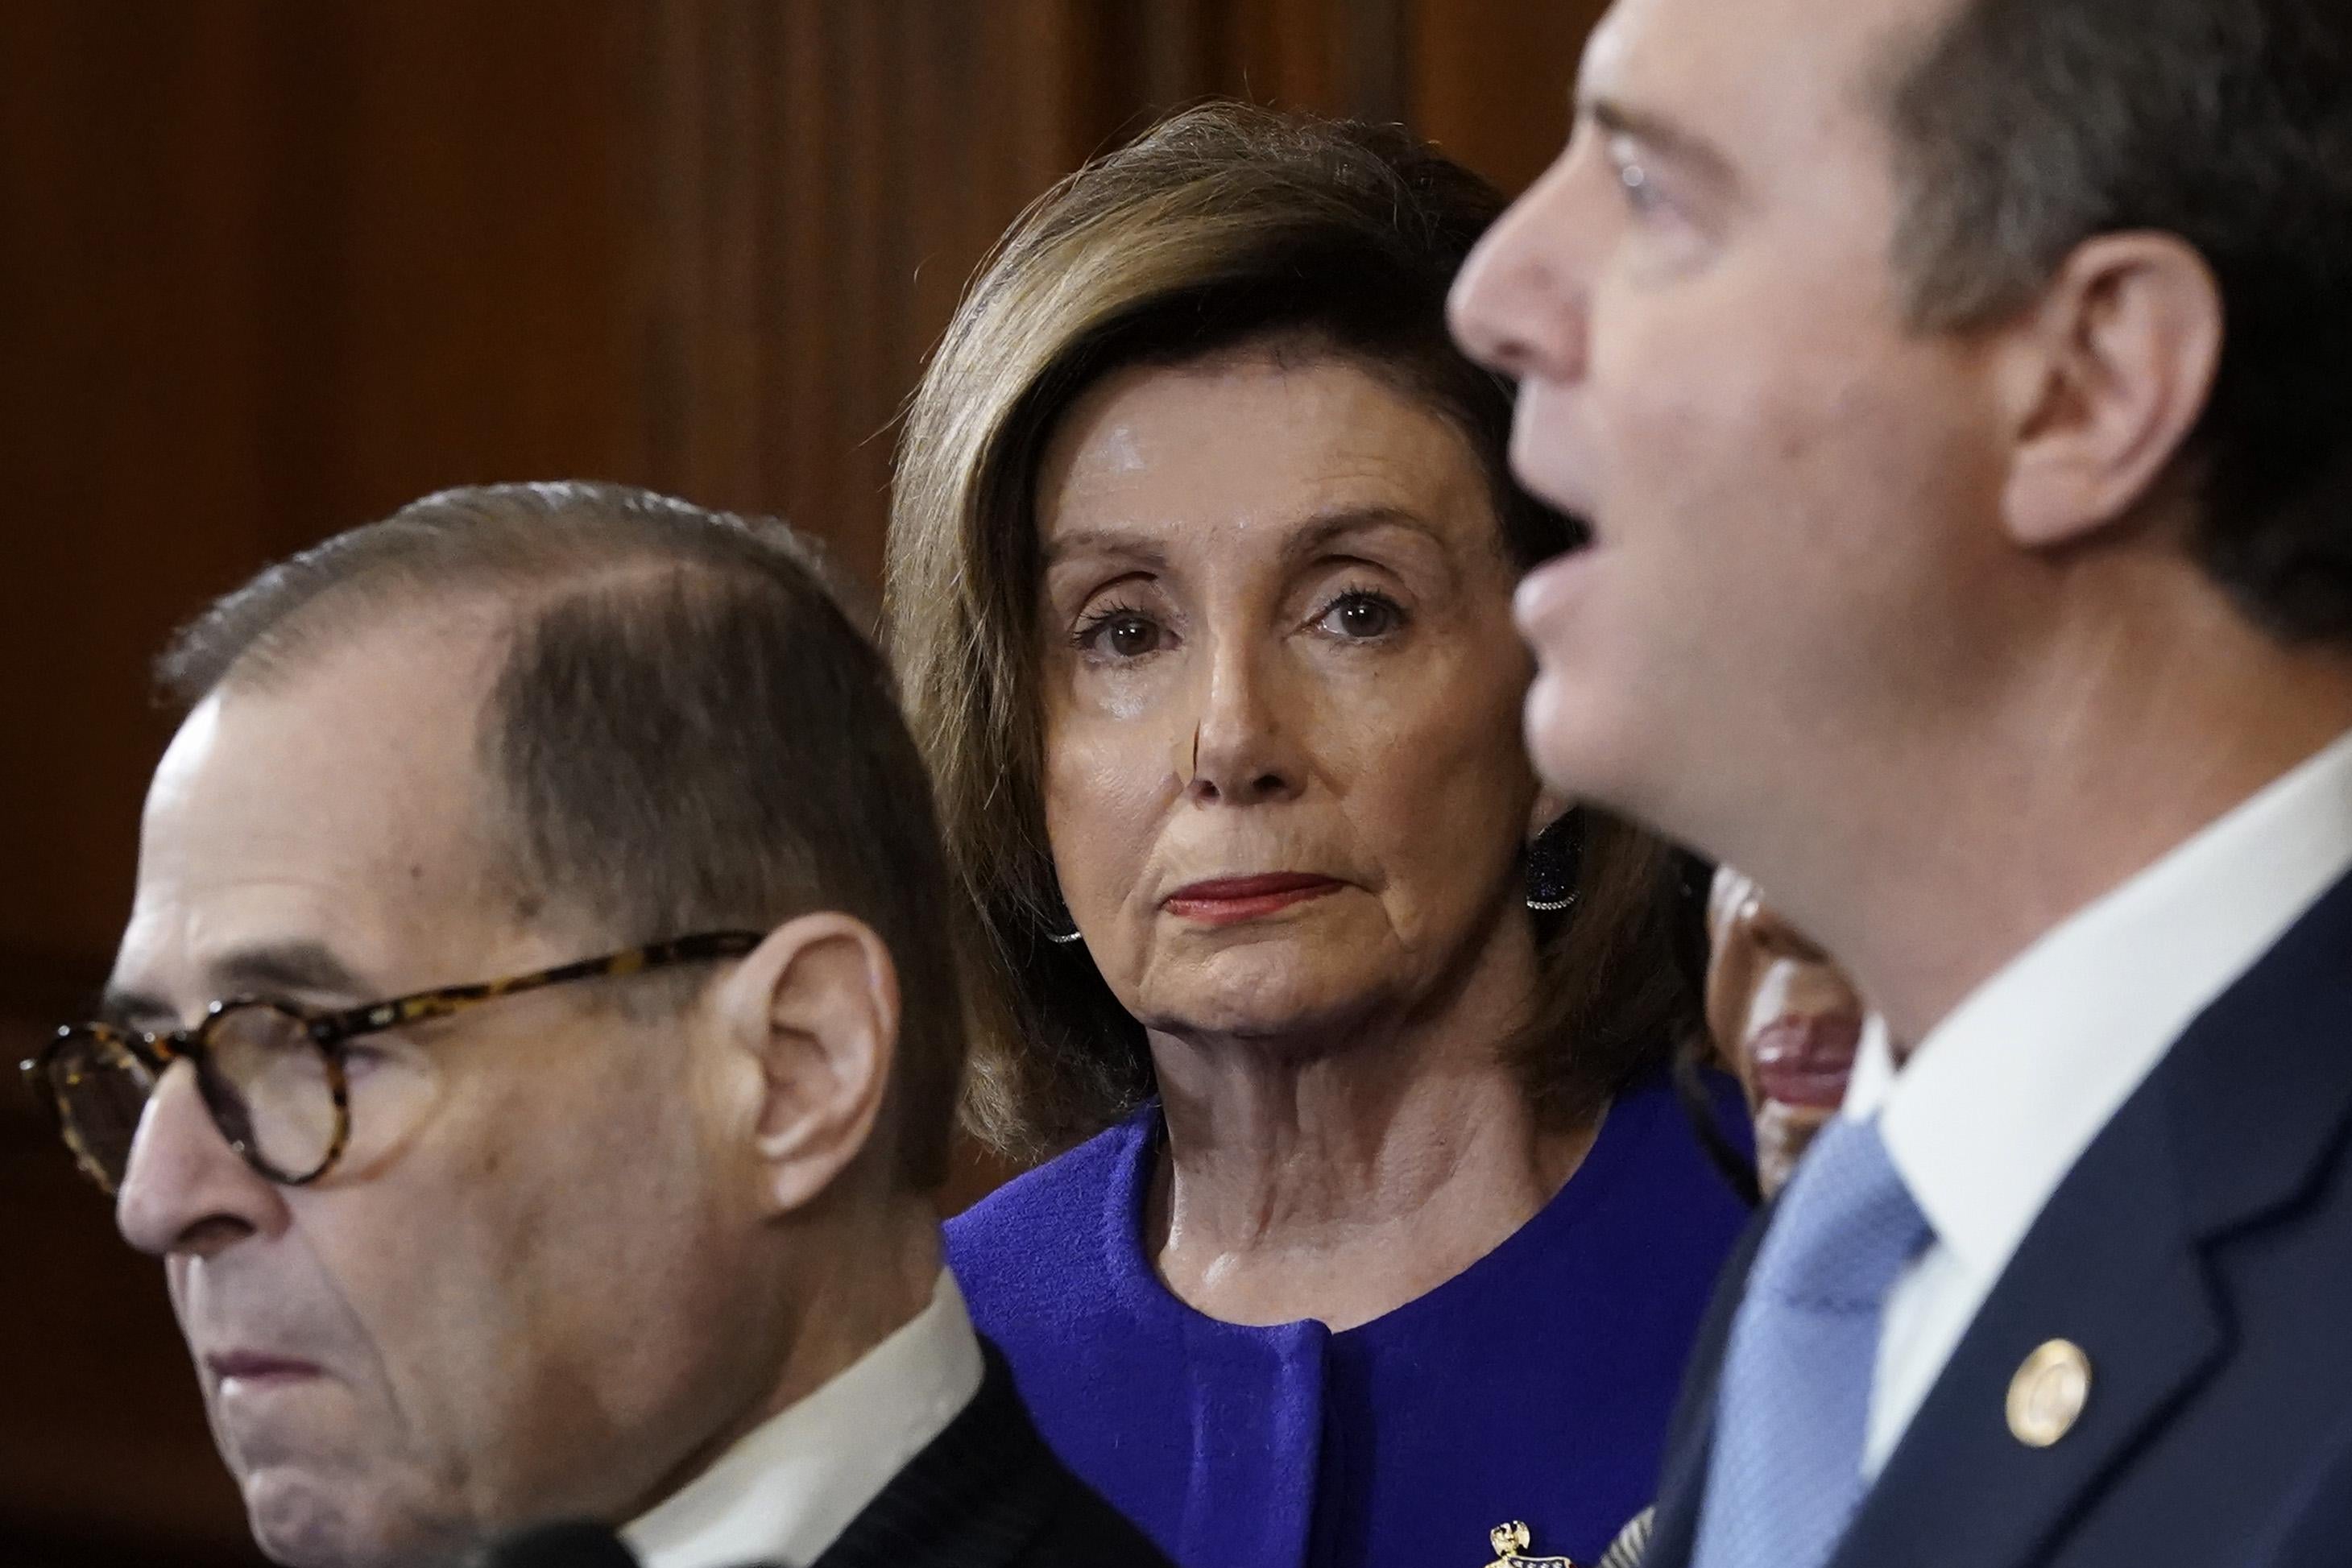 Nancy Pelosi stares directly at the camera as Jerry Nadler stares off in the distance and Adam Schiff speaks into the mic.